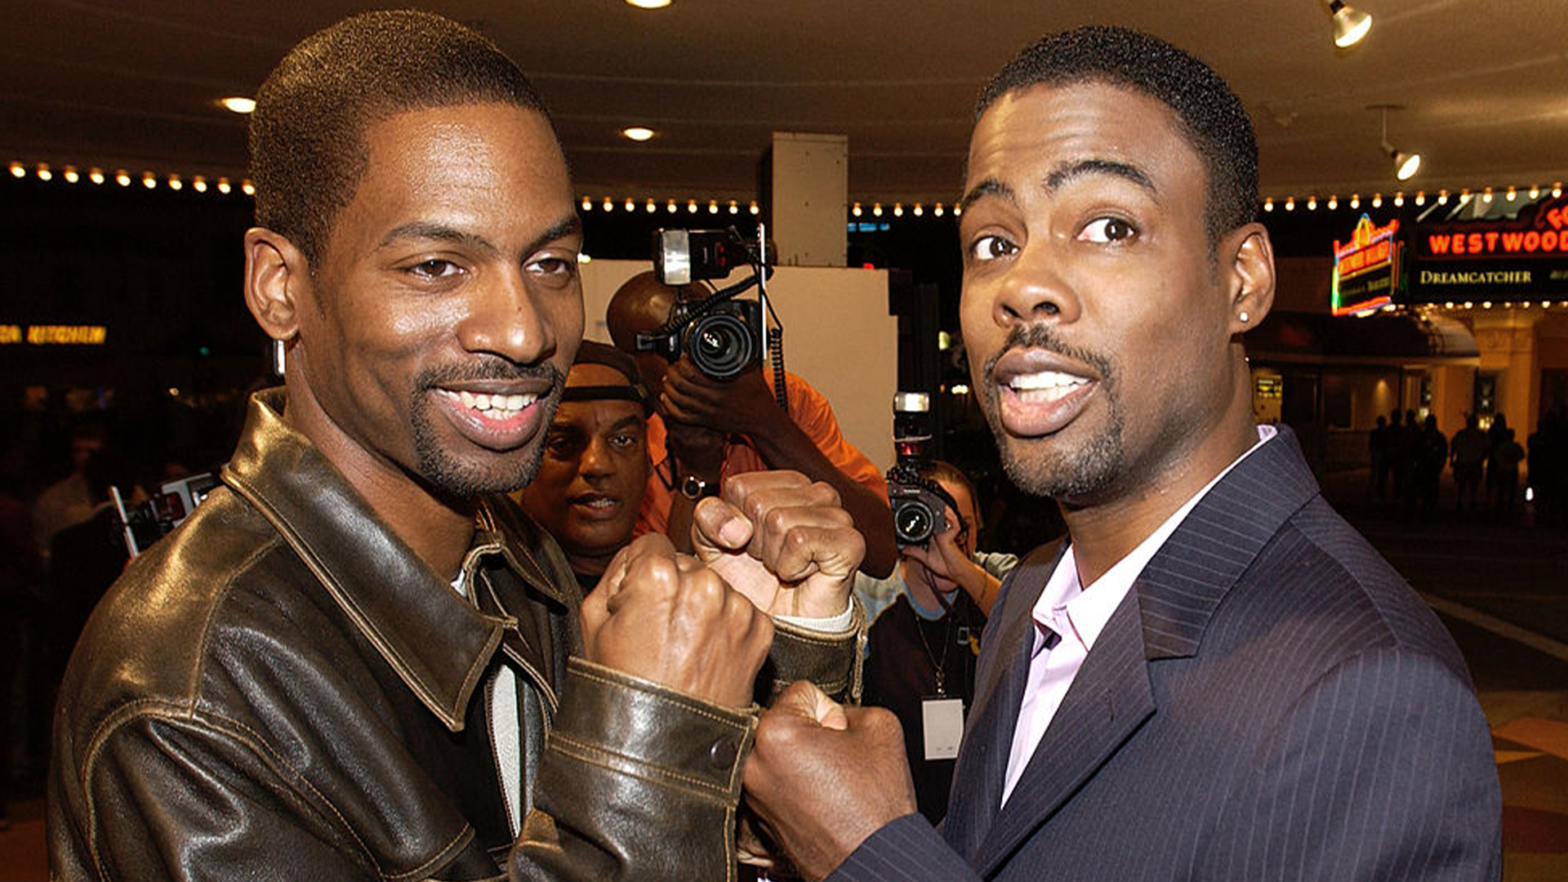 It's A Family Affair: All About The Careers And Success Of Chris Rock's Talented Siblings